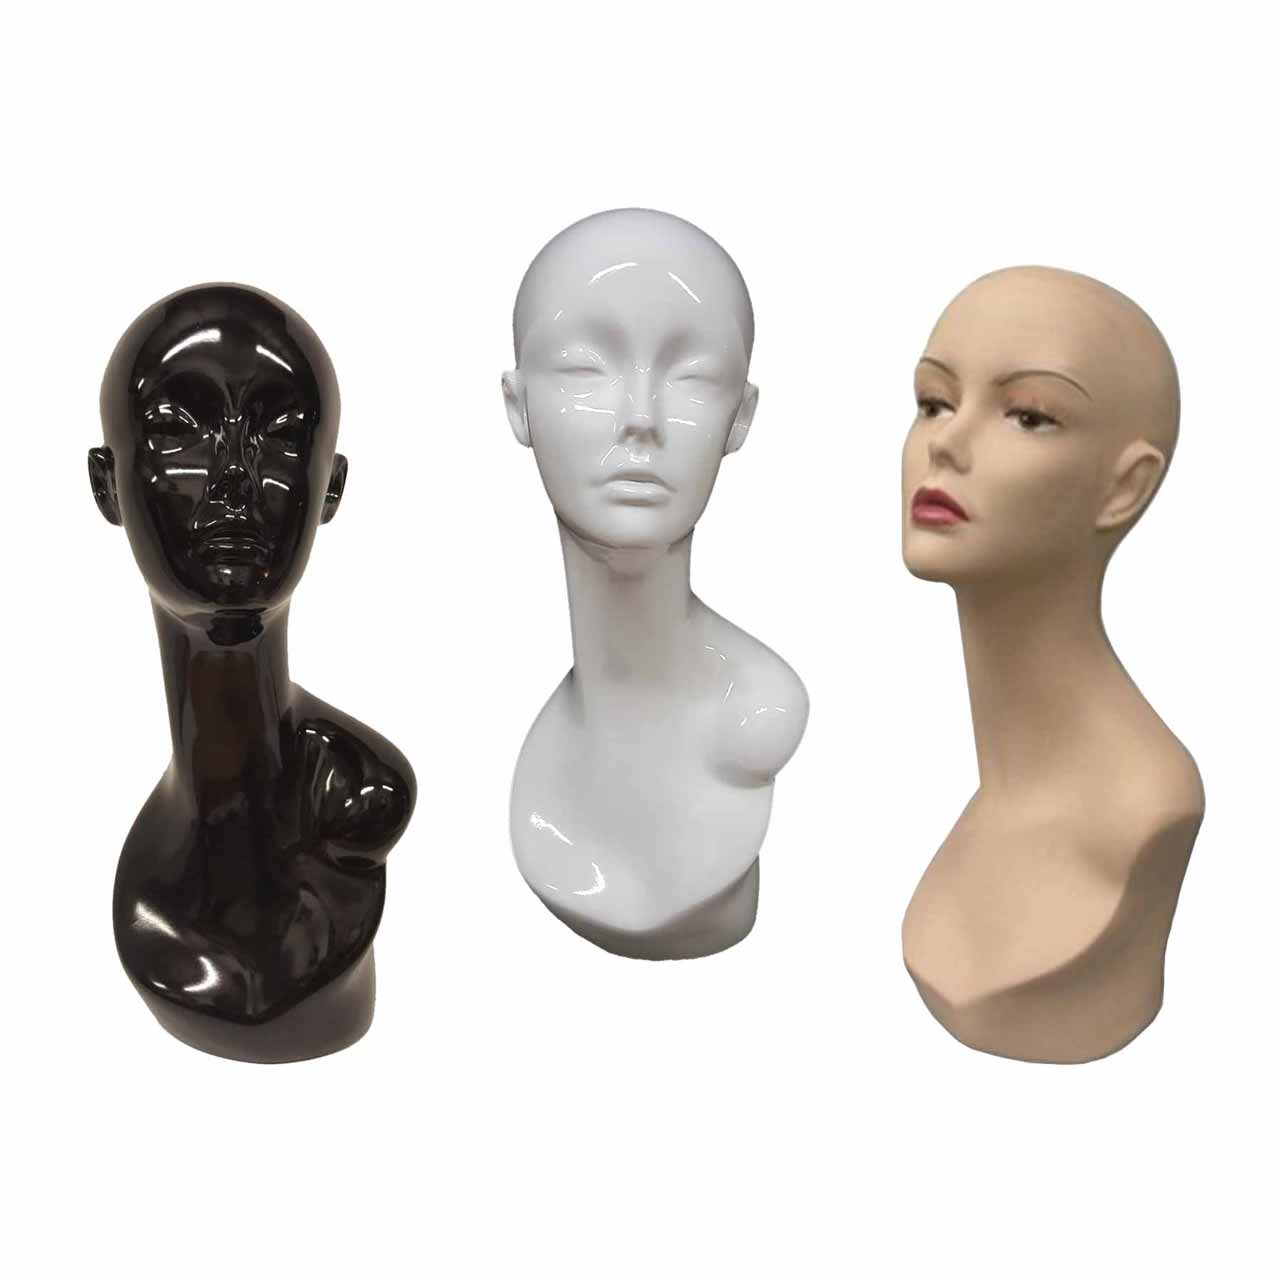 Group image of Female Fiberglass Mannequin Heads with Pierced Ears